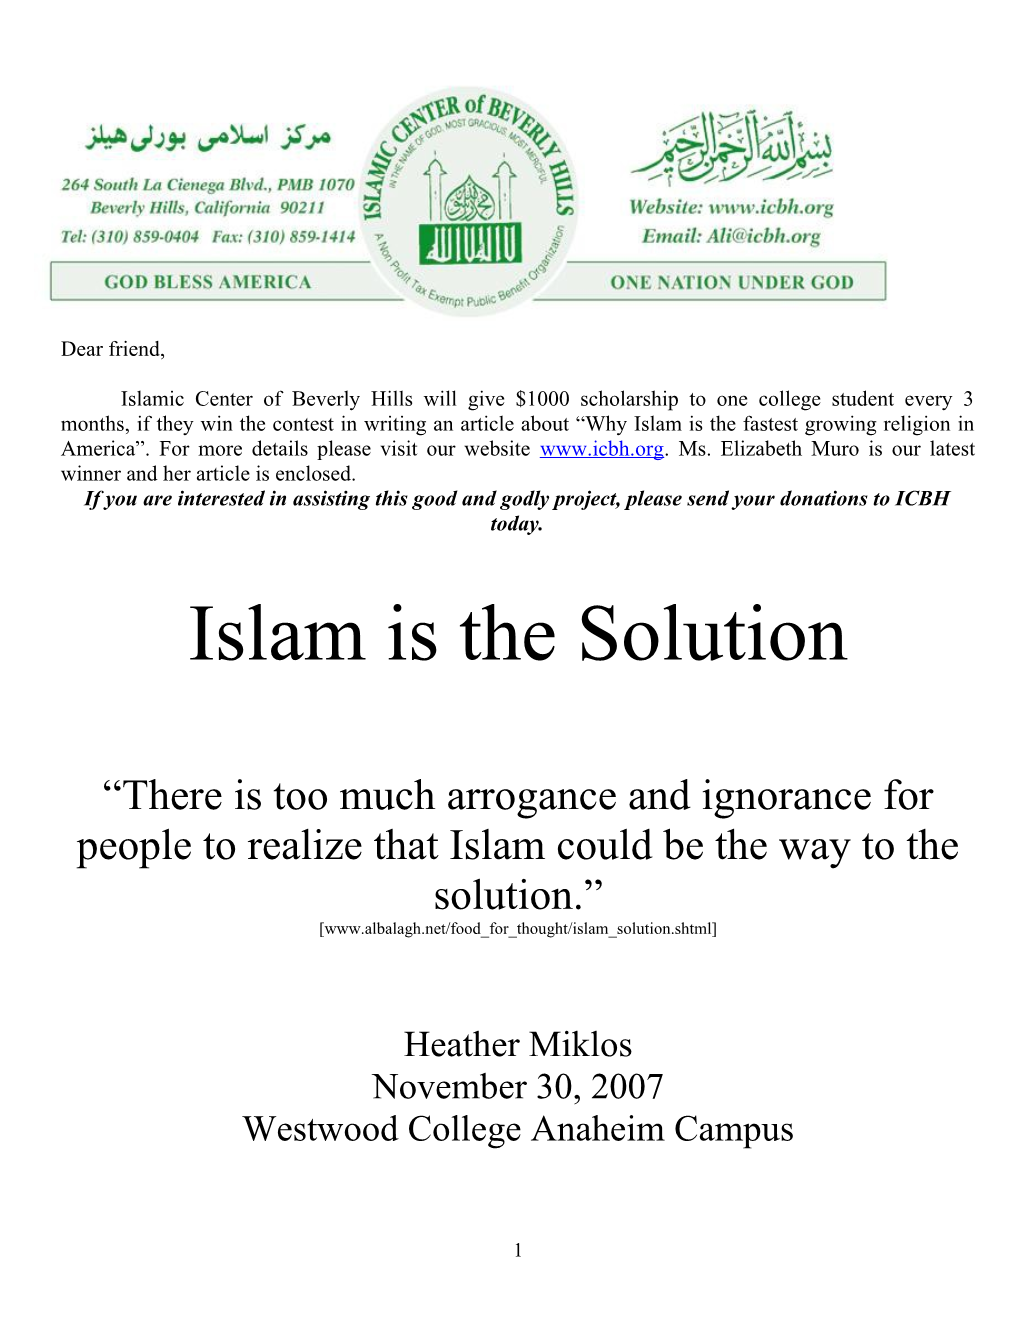 Islam Is the Solution